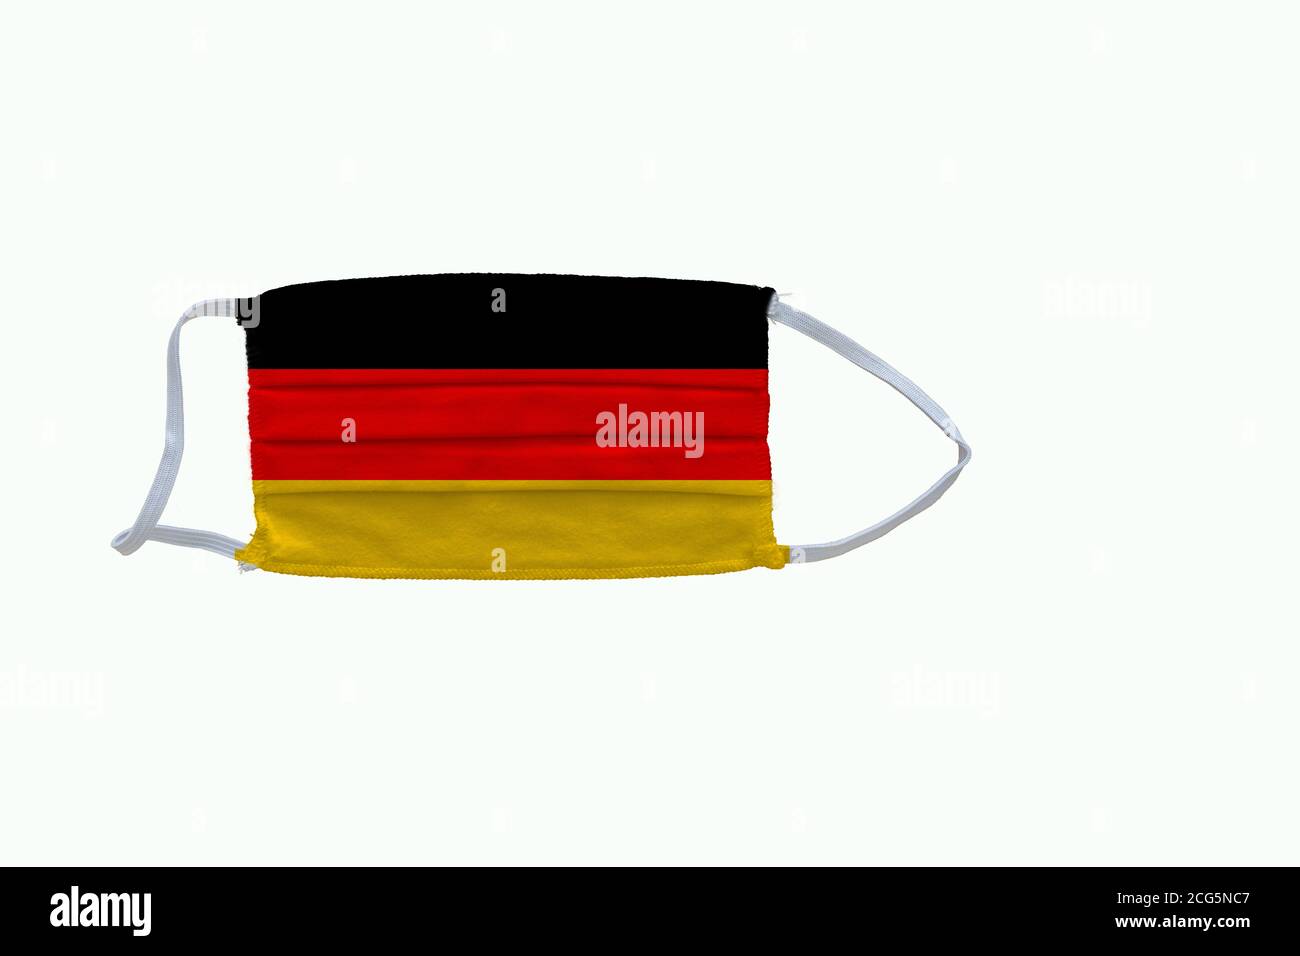 German flag design Covid-19 pandemic  virus face mask  on a white background with copy space Stock Photo